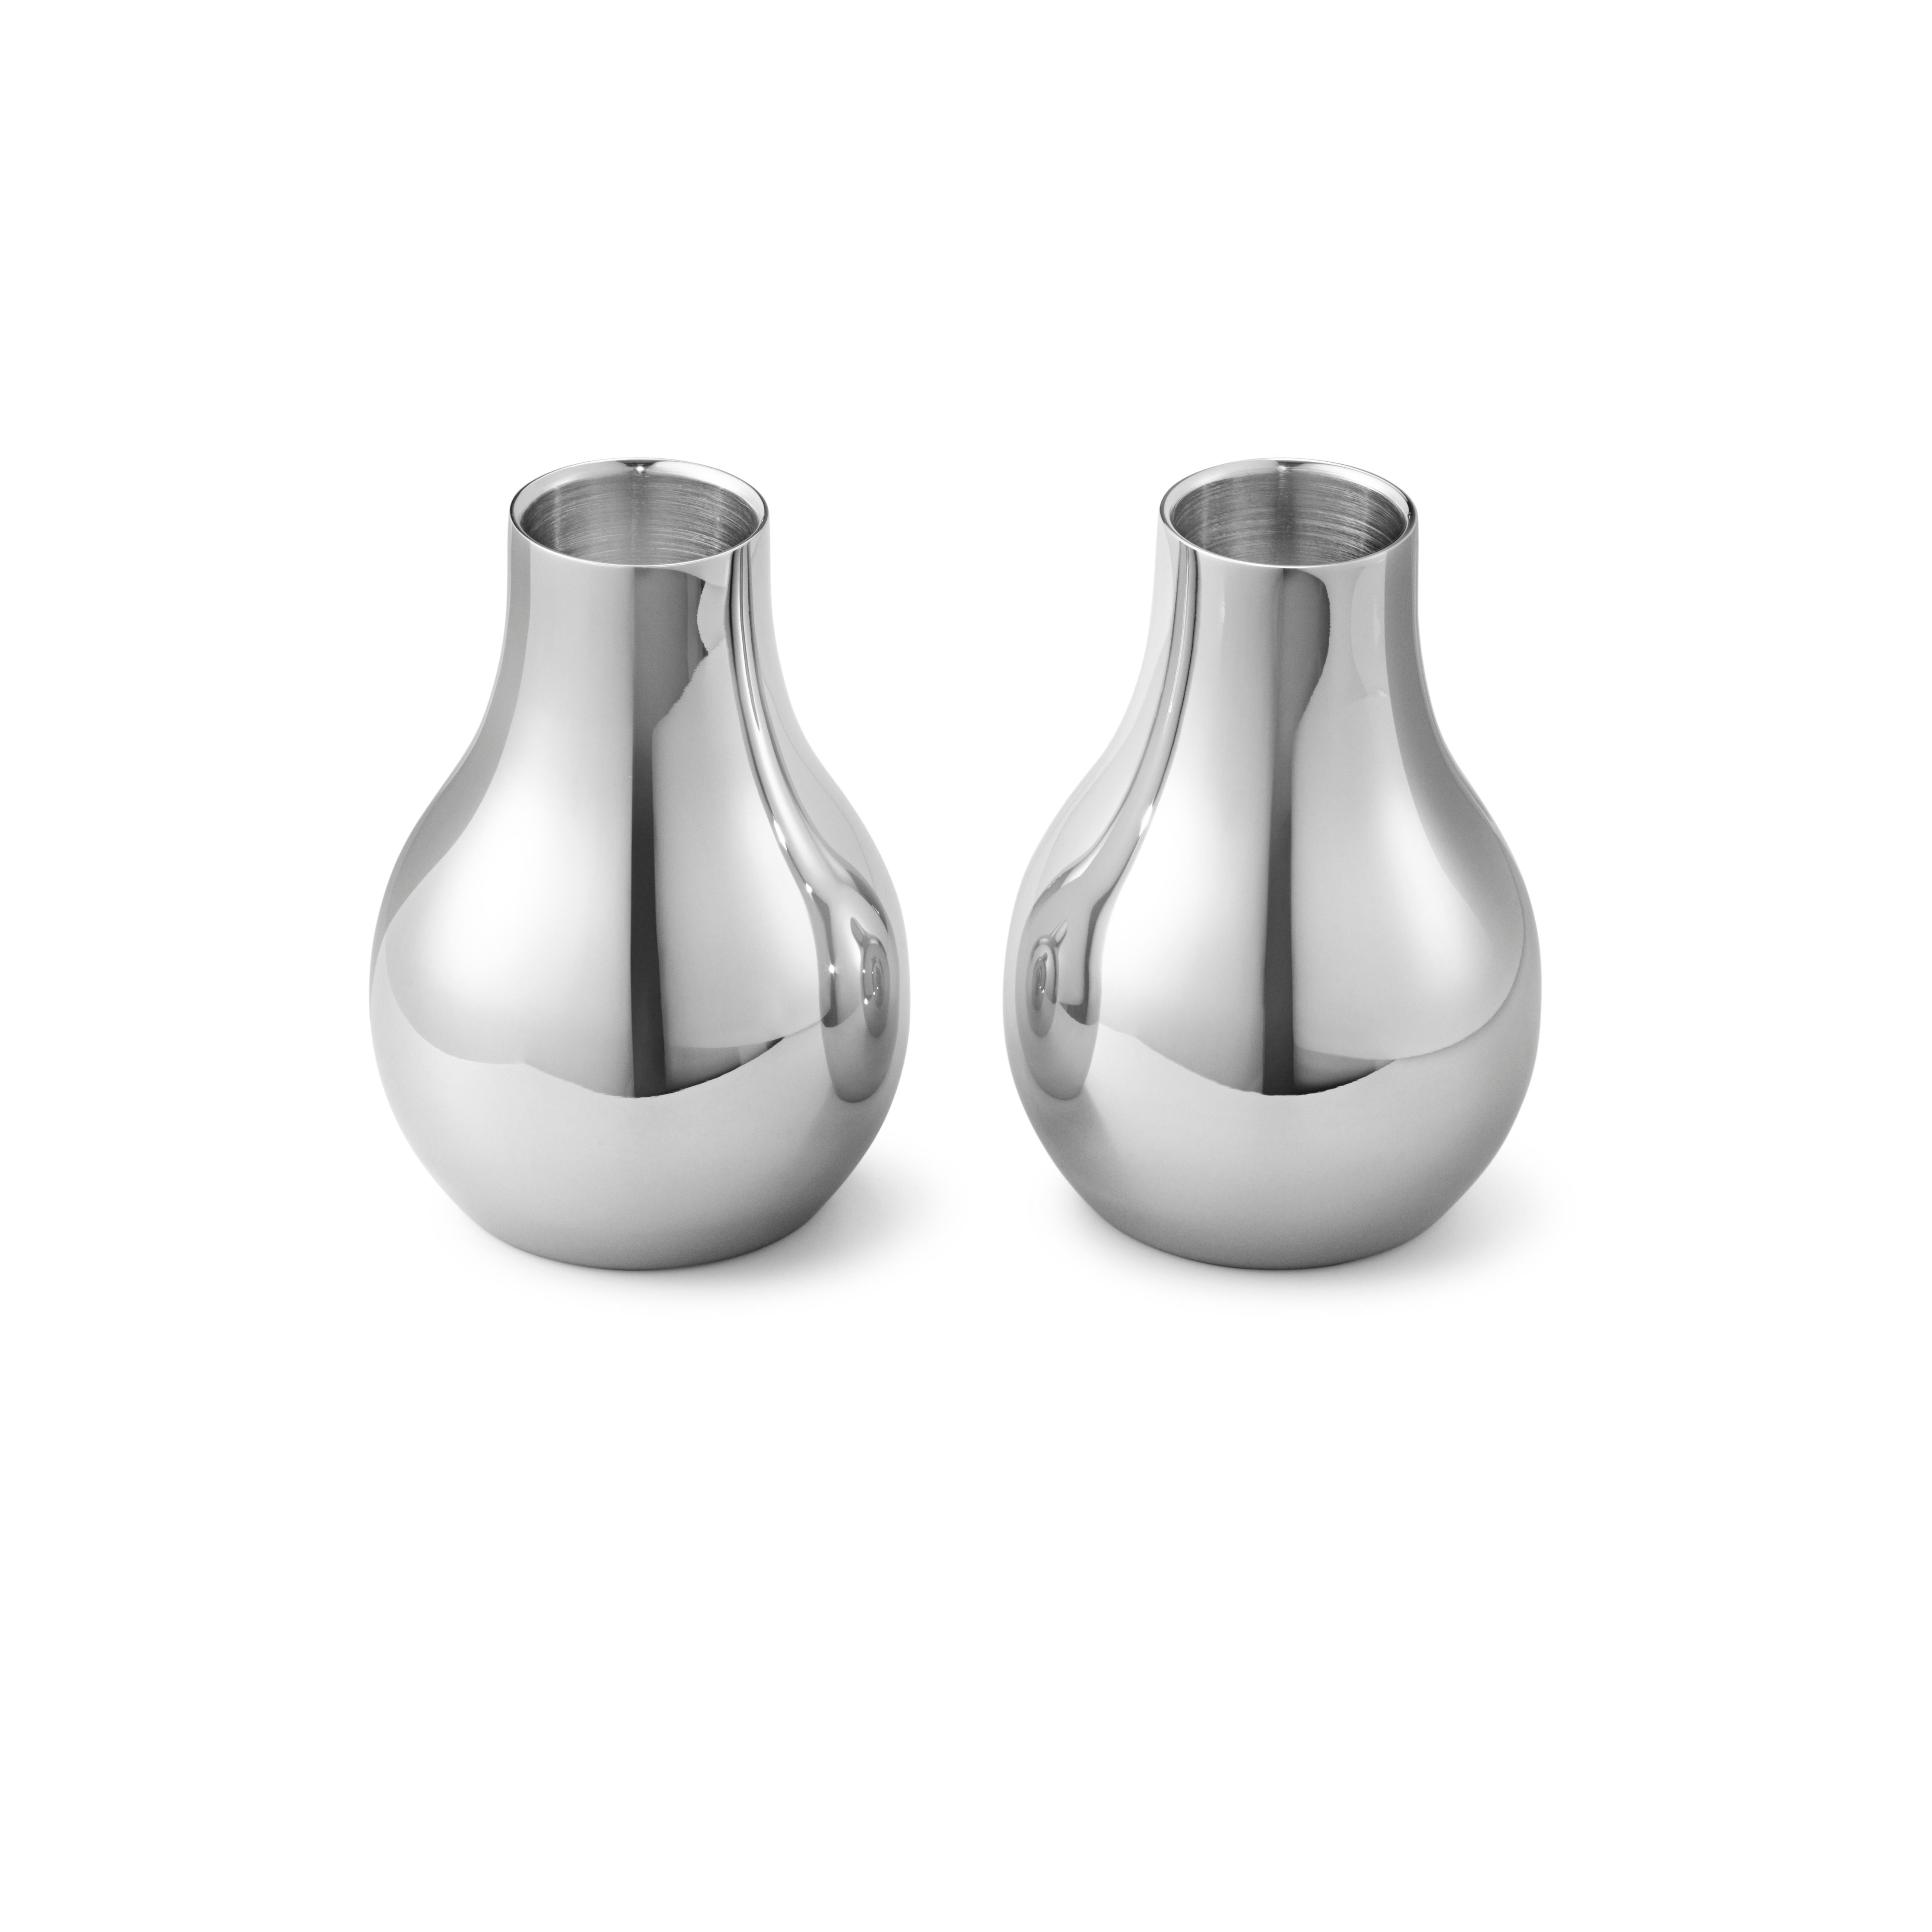 Set of two small candleholders in stainless steel with mirror finish.

Understated elegance emanates from the alluring soft contours of the Cafu collection designed by Holmbäck Nordentoft as a tribute to the Georg Jensen legacy of great designers.